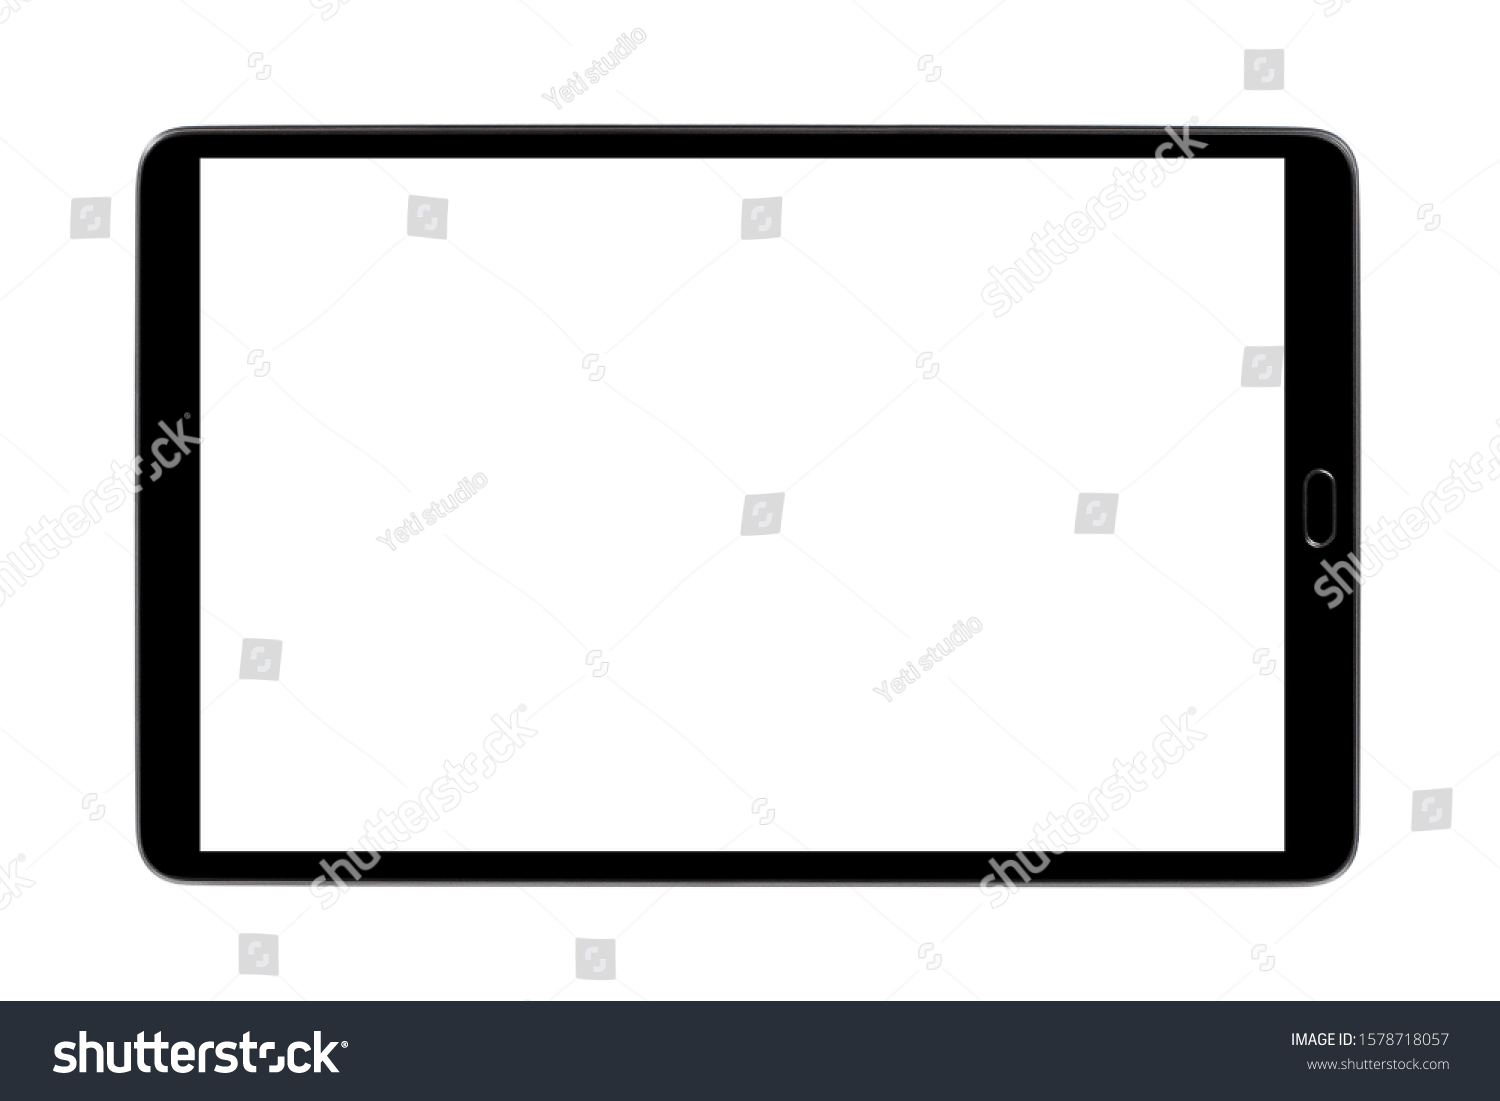 Black tablet, isolated on white background #1578718057